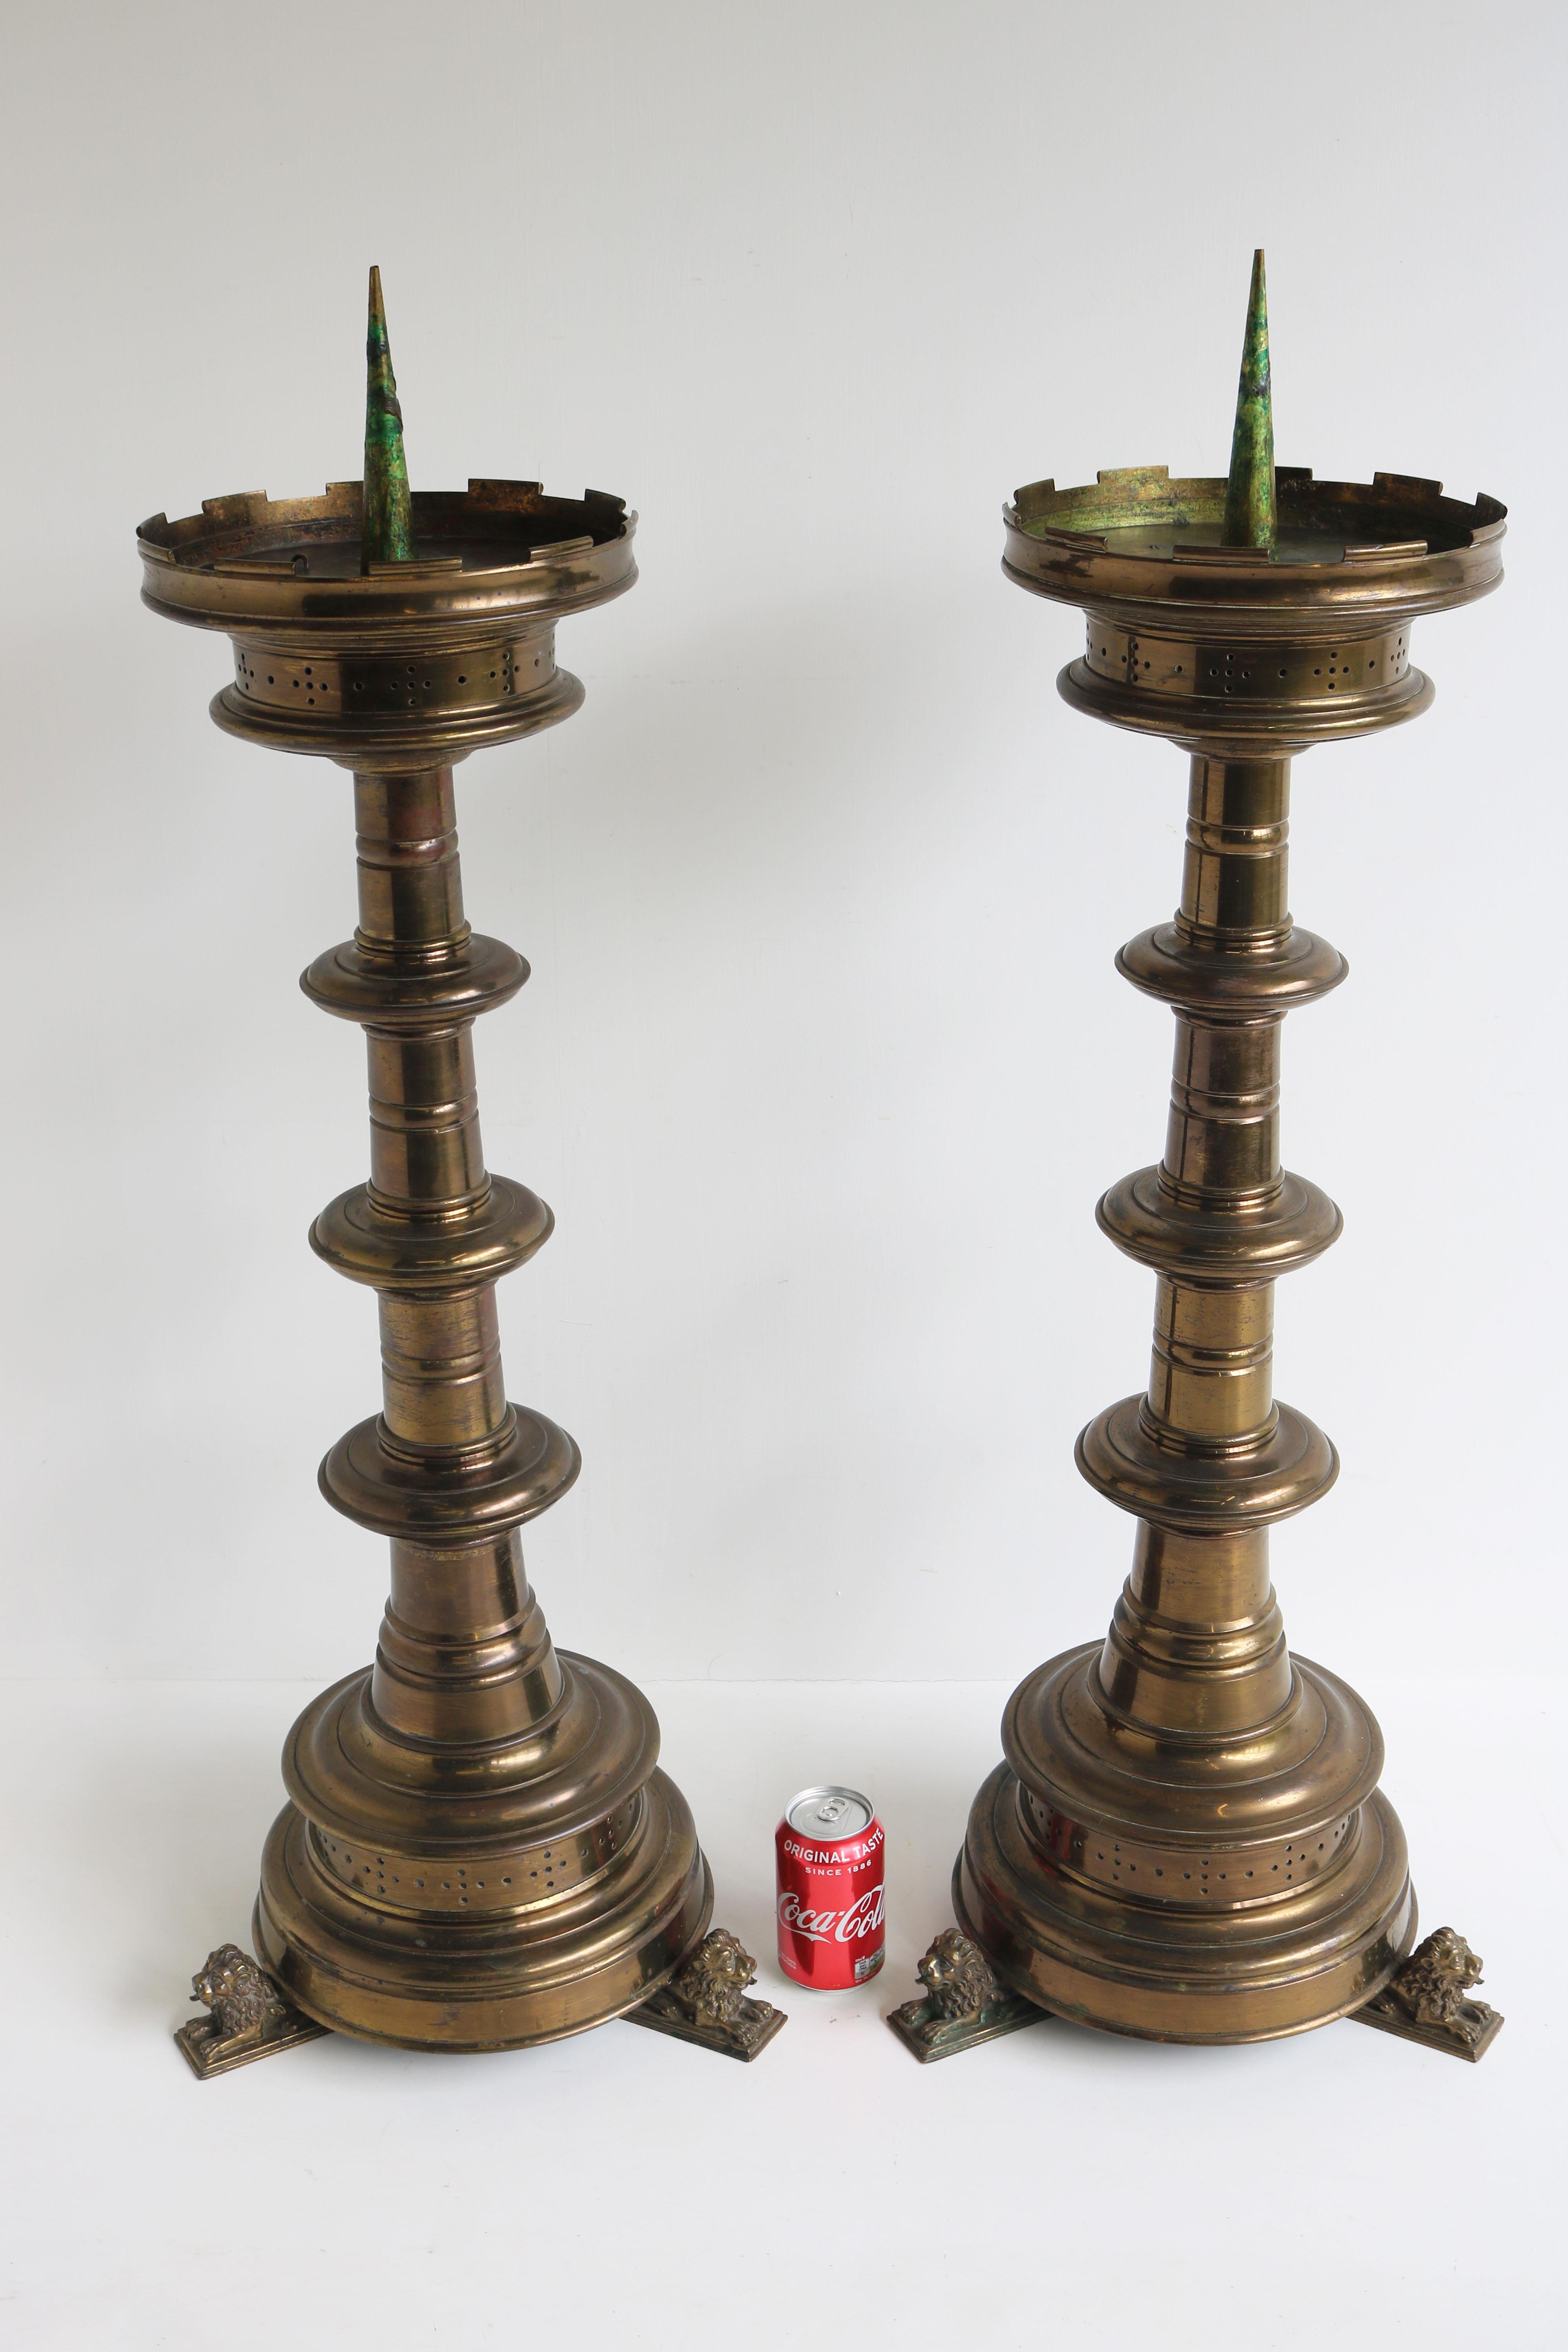 Pair of Large Gilt Bronze Gothic Revival Church Candlesticks Candleholders Lions For Sale 2